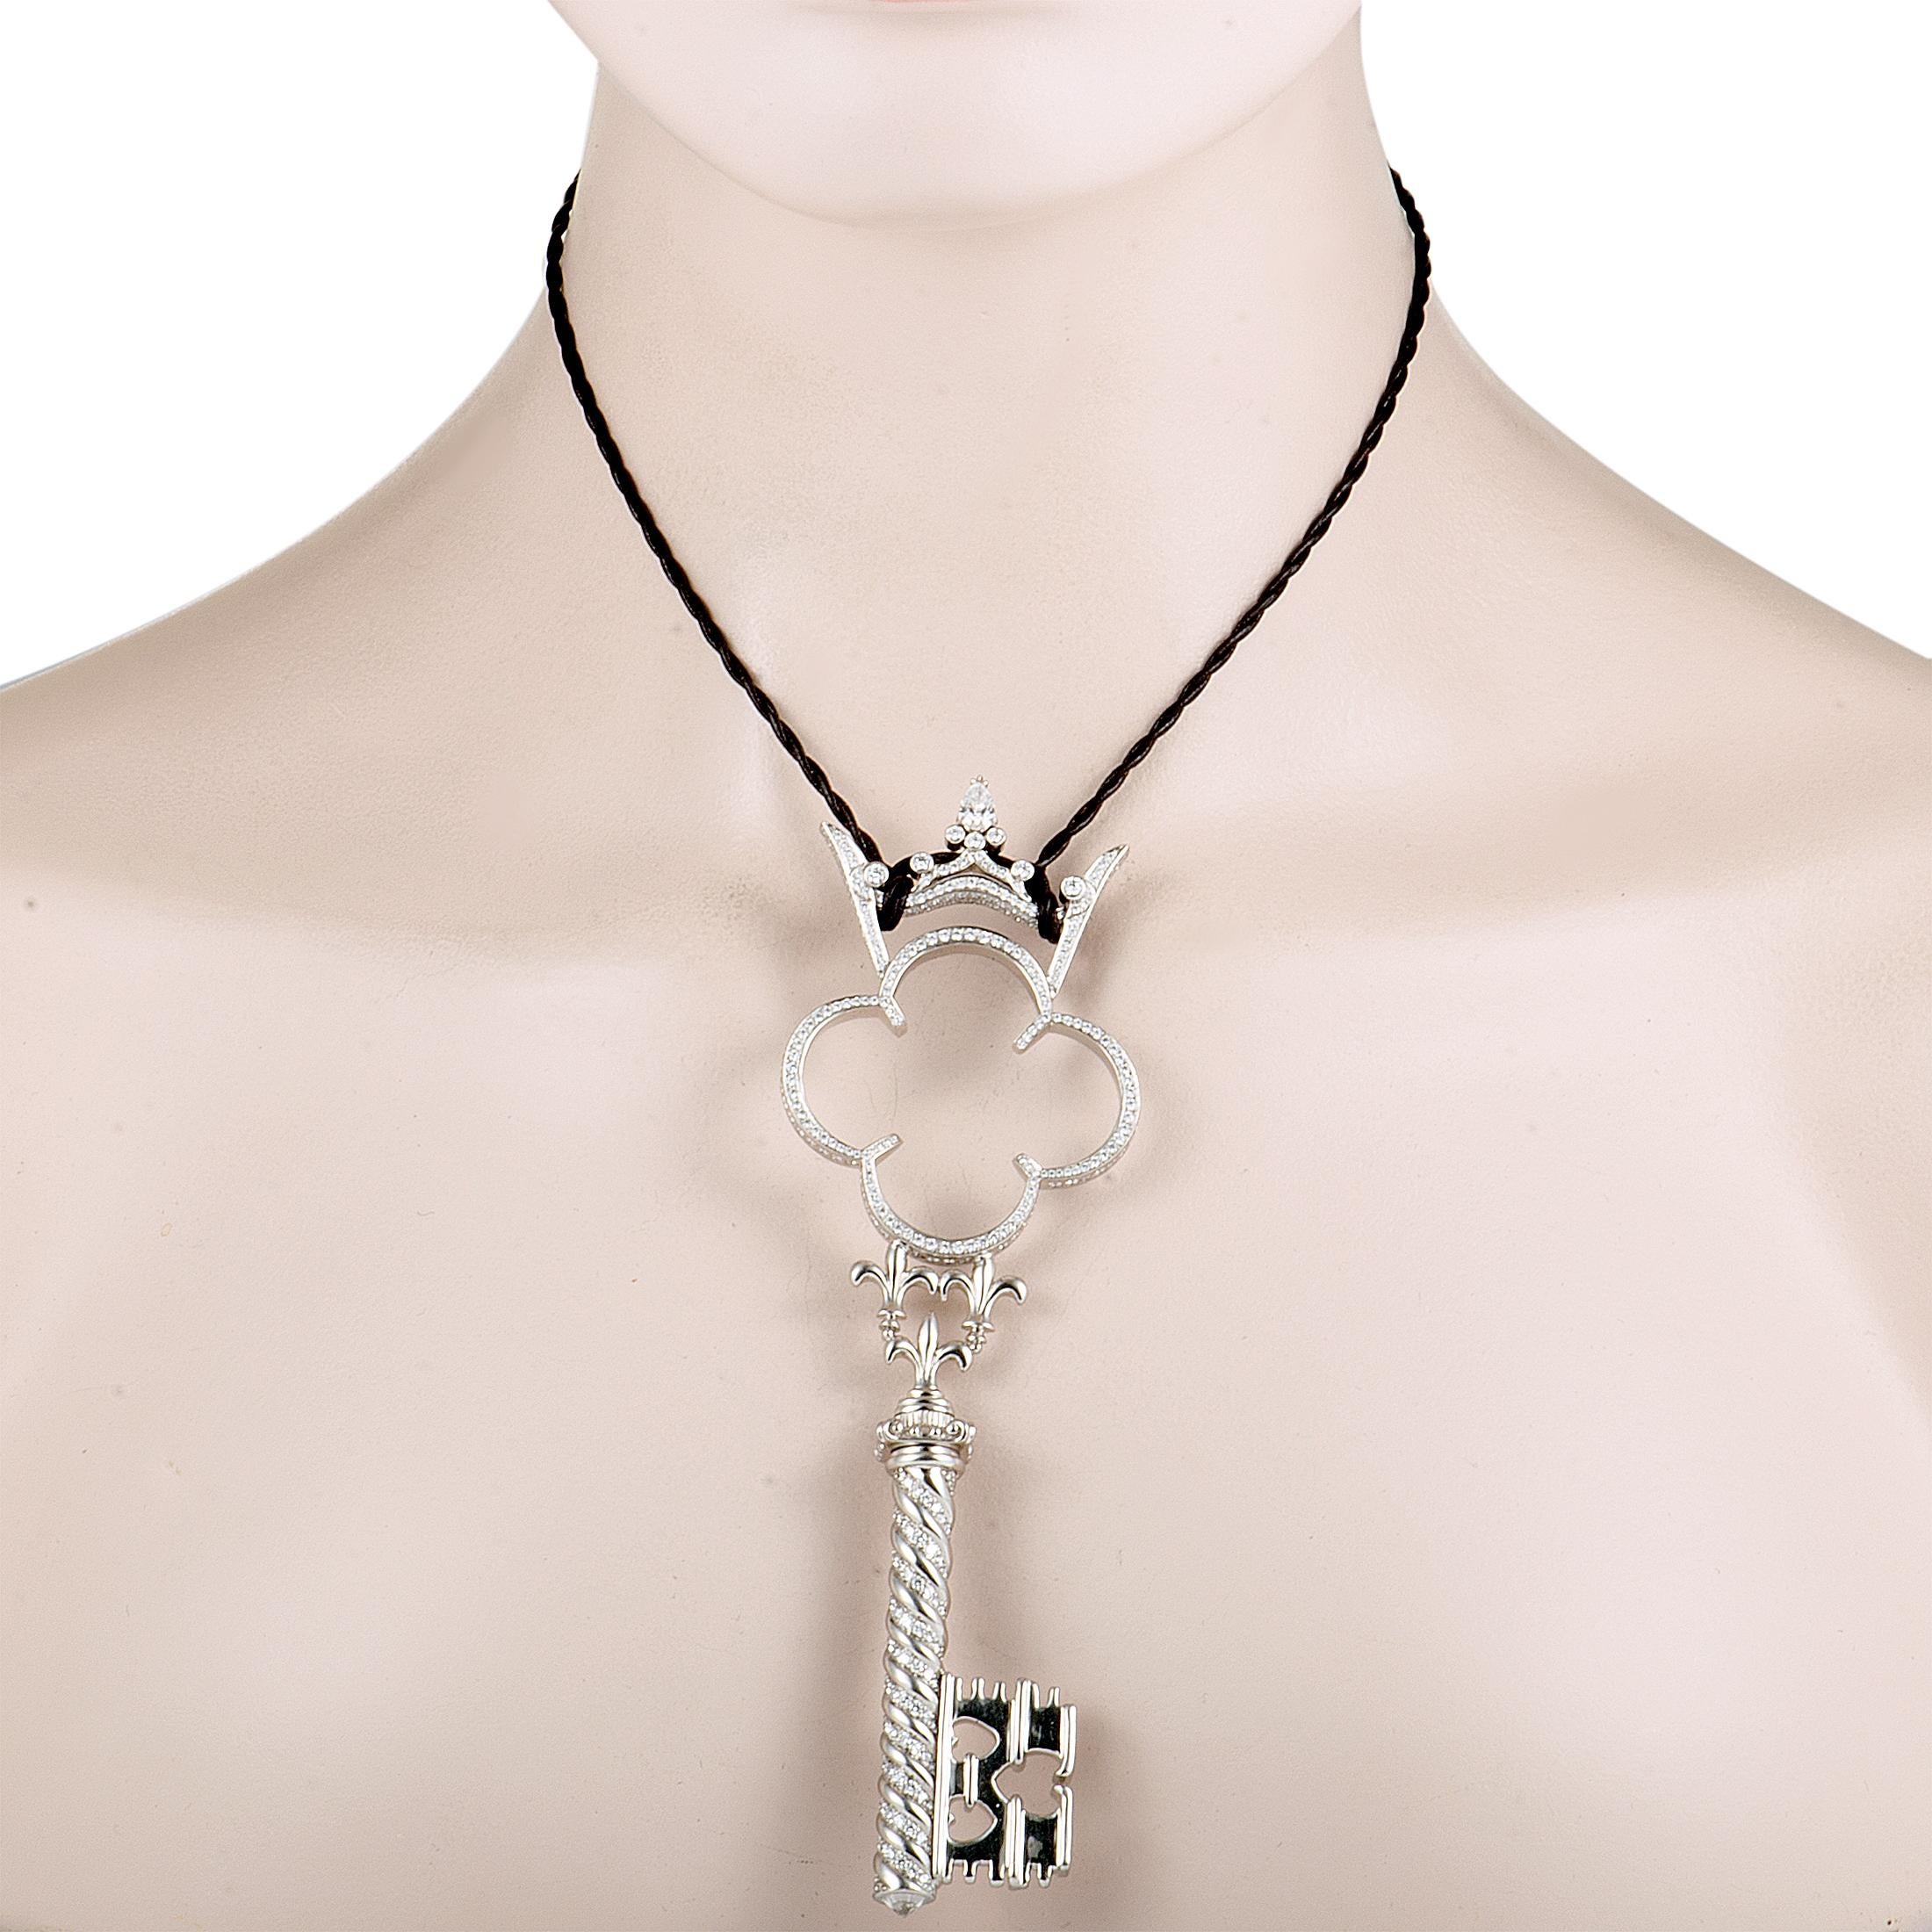 A statement piece of immense aesthetic and artistic value, this fabulous necklace is designed by Prince Dimitri and it boasts an imaginatively envisioned key pendant that is beautifully crafted from platinum and presented on a stylish black cord.